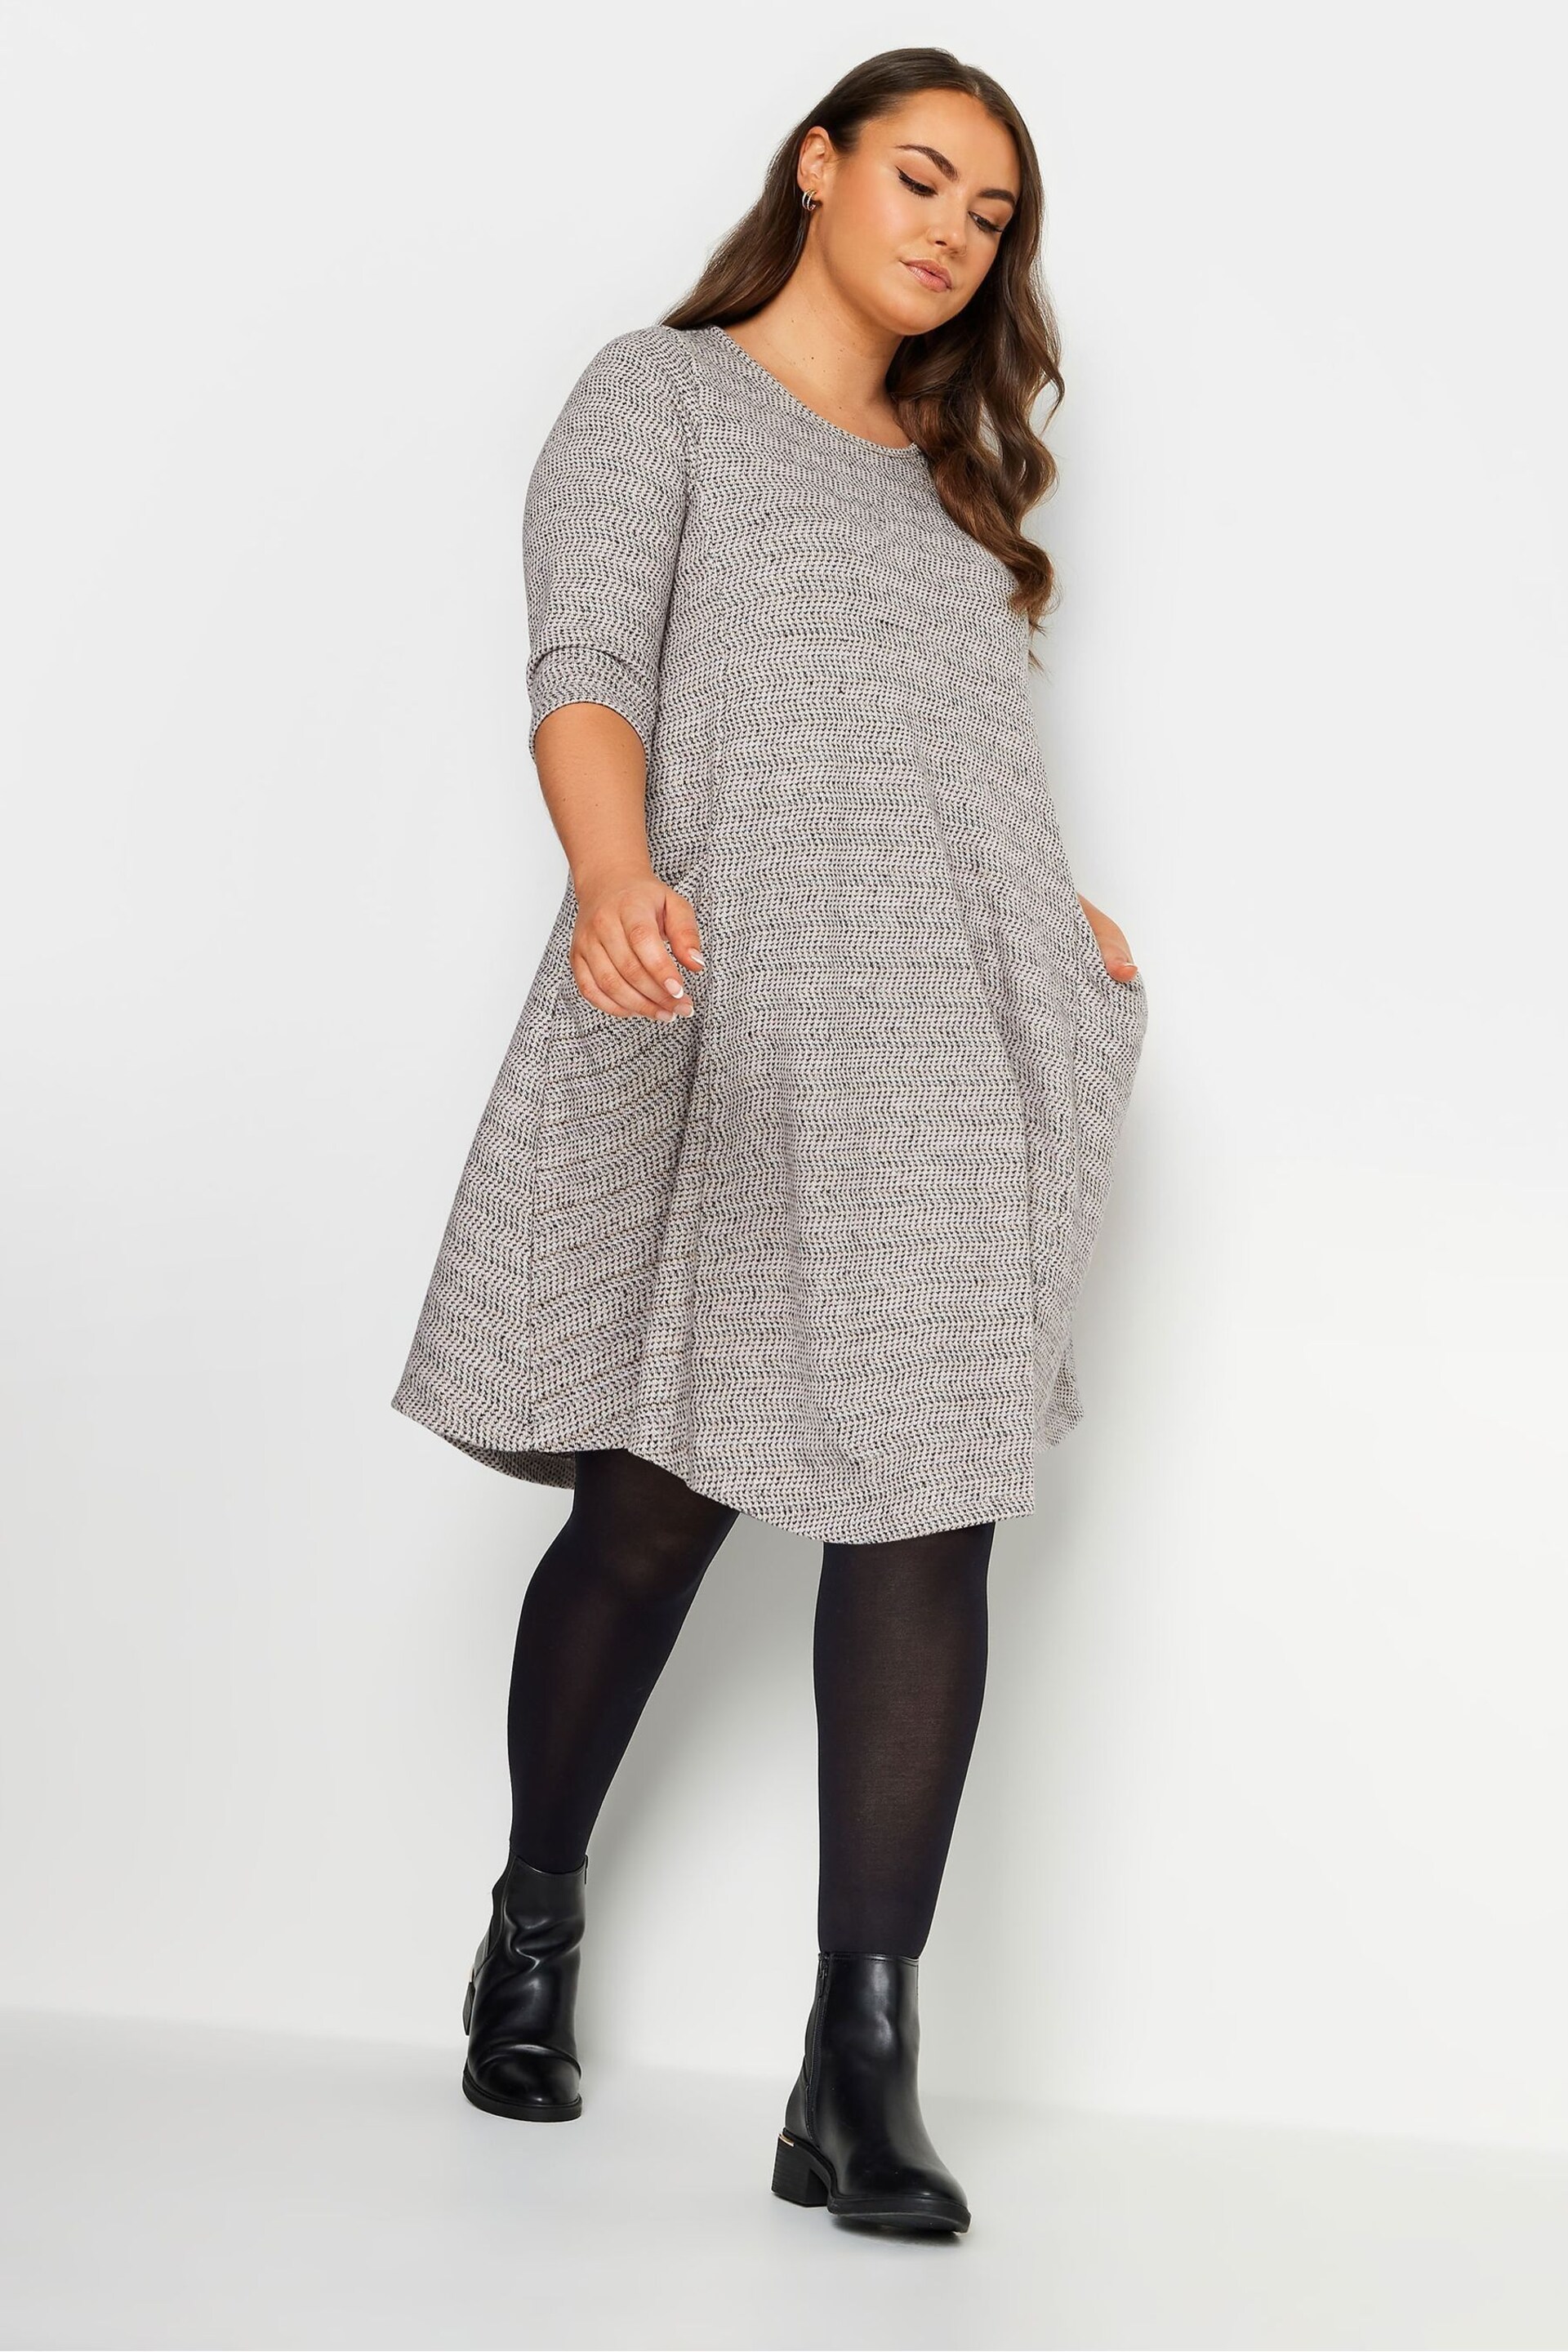 Yours Curve Grey Soft Touch Drape Pocket Dress - Image 3 of 4